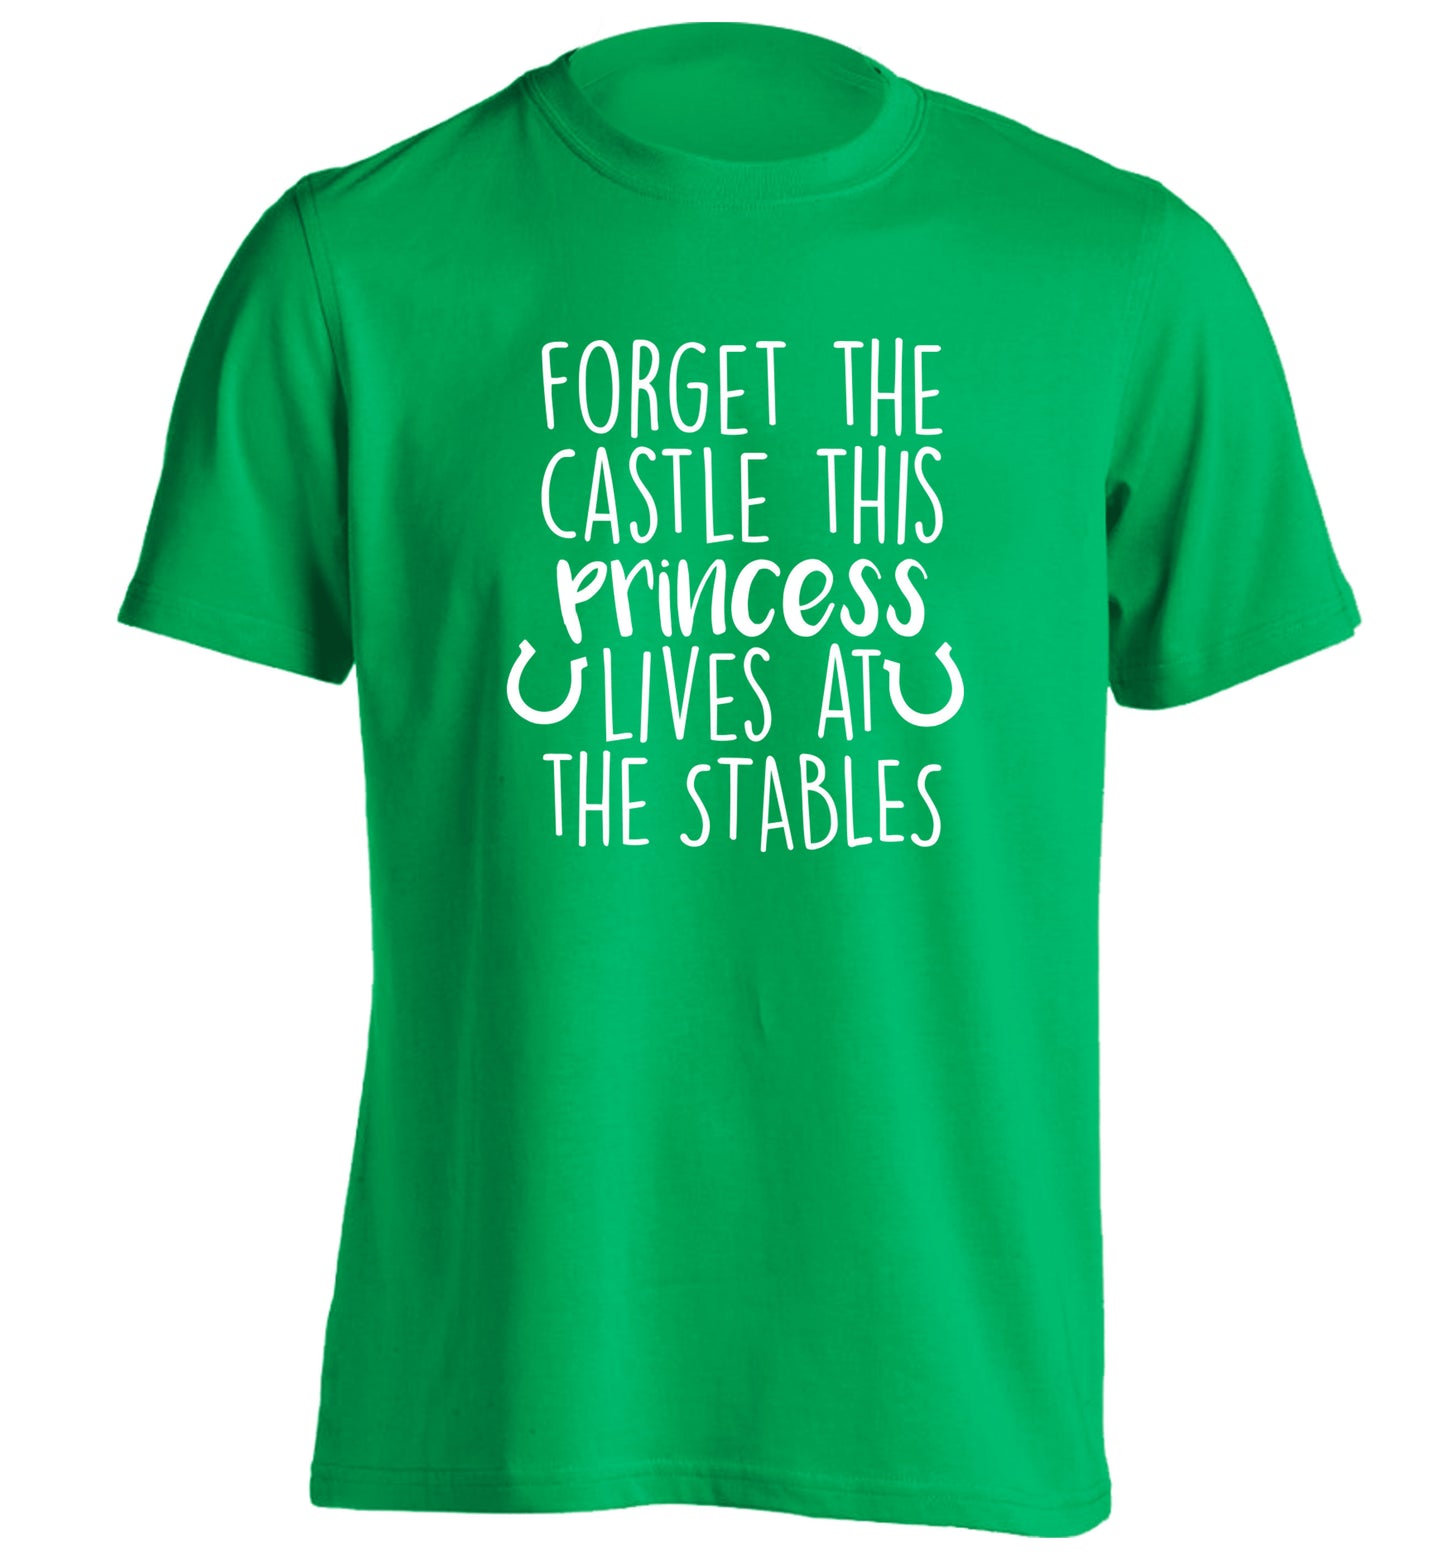 Forget the castle this princess lives at the stables adults unisex green Tshirt 2XL